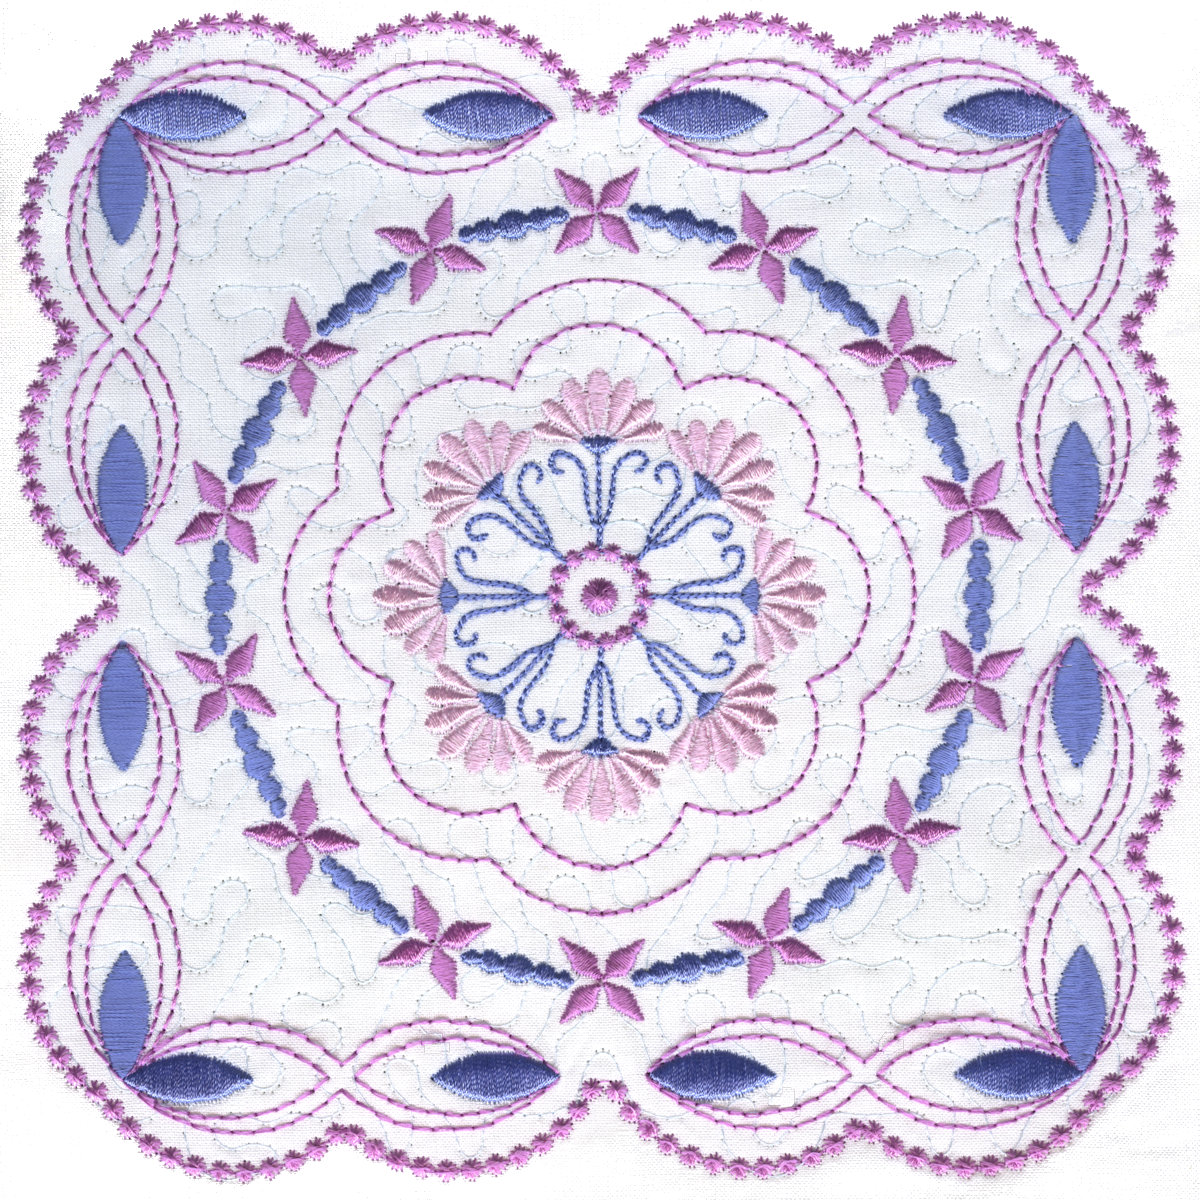 Design 1:  8x8 inch (200x200mm) candlewicking quilt block, charming embroidery, easy to stitch.